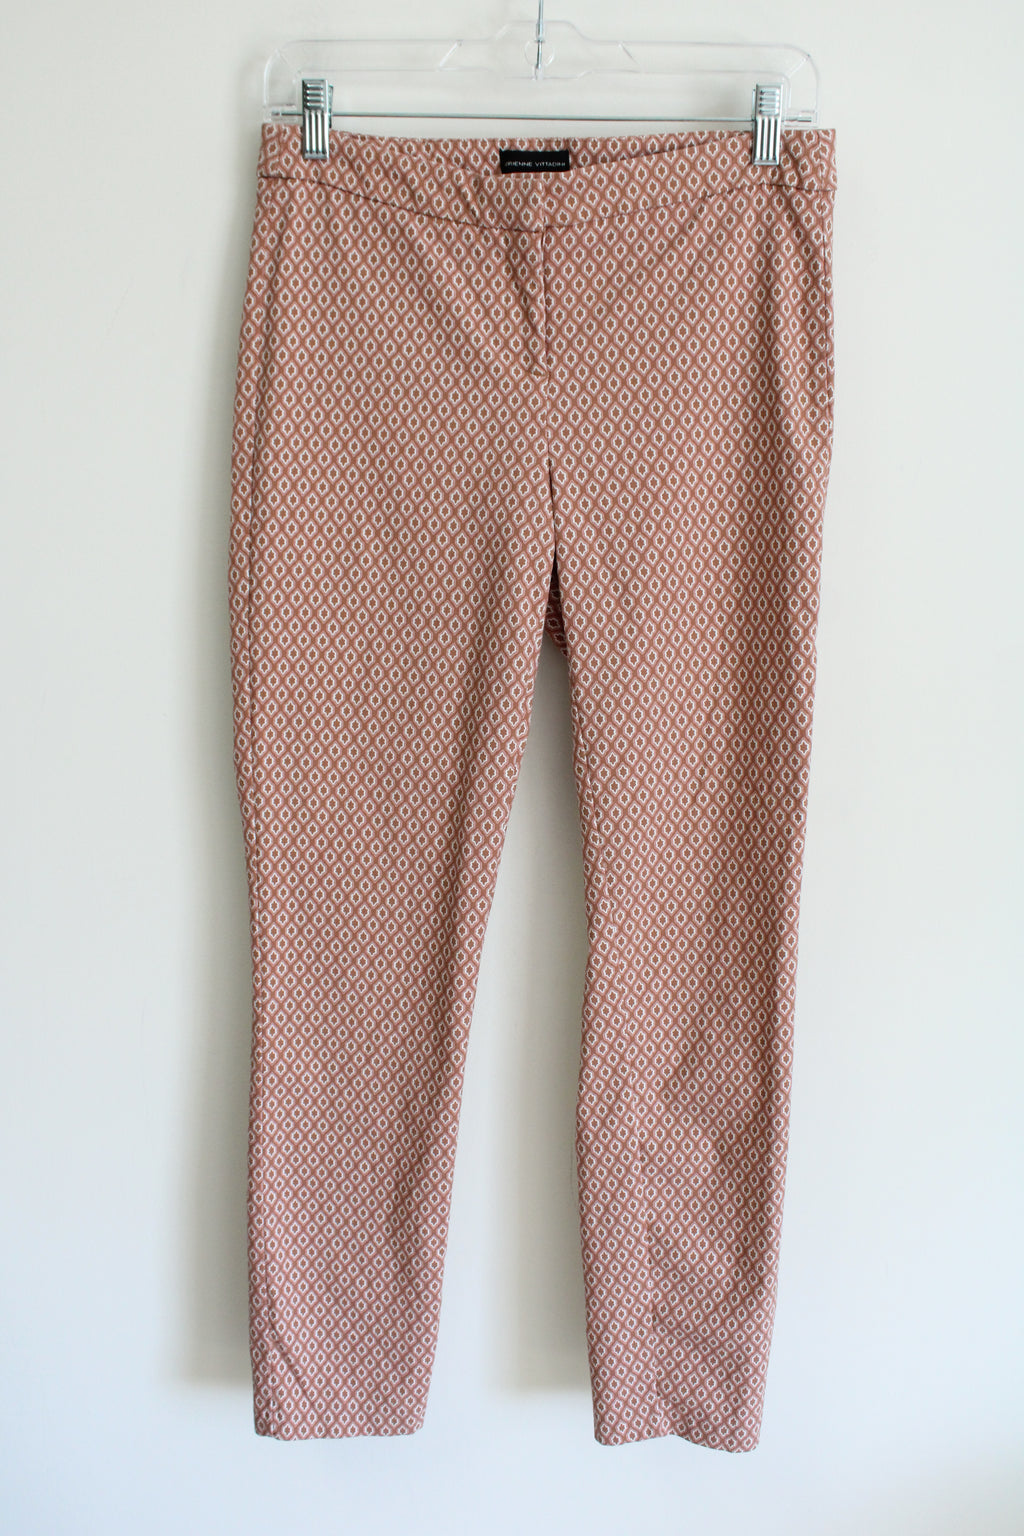 Adrienne Vittadini Pink Patterned Stretch Pant | 6